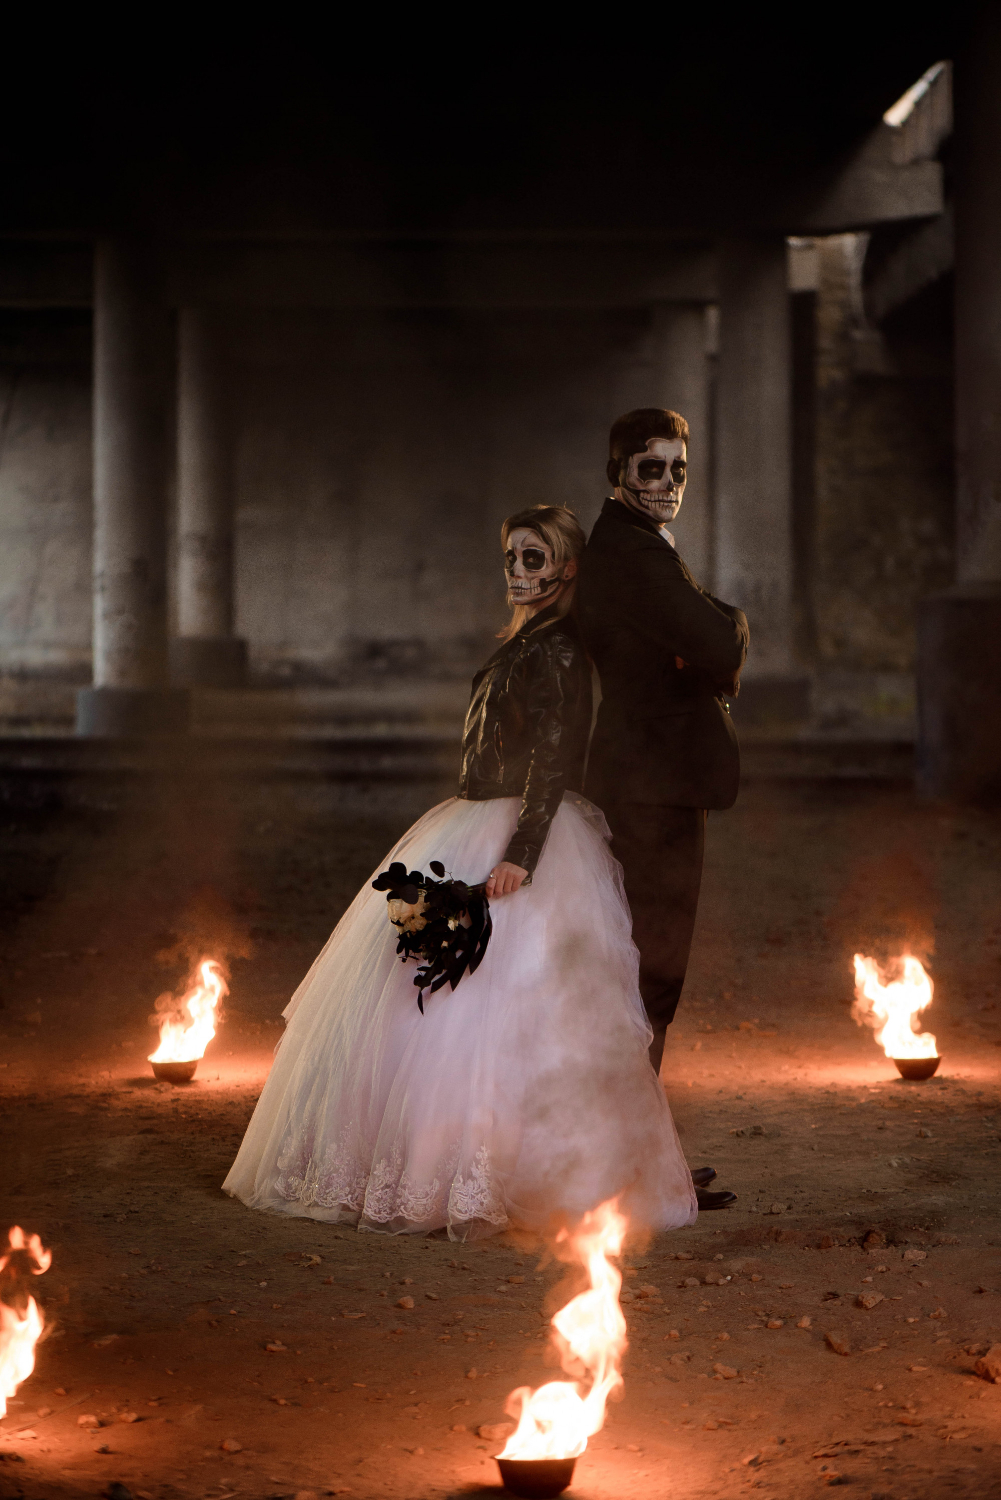  dressed in wedding clothes romantic zombie couple.